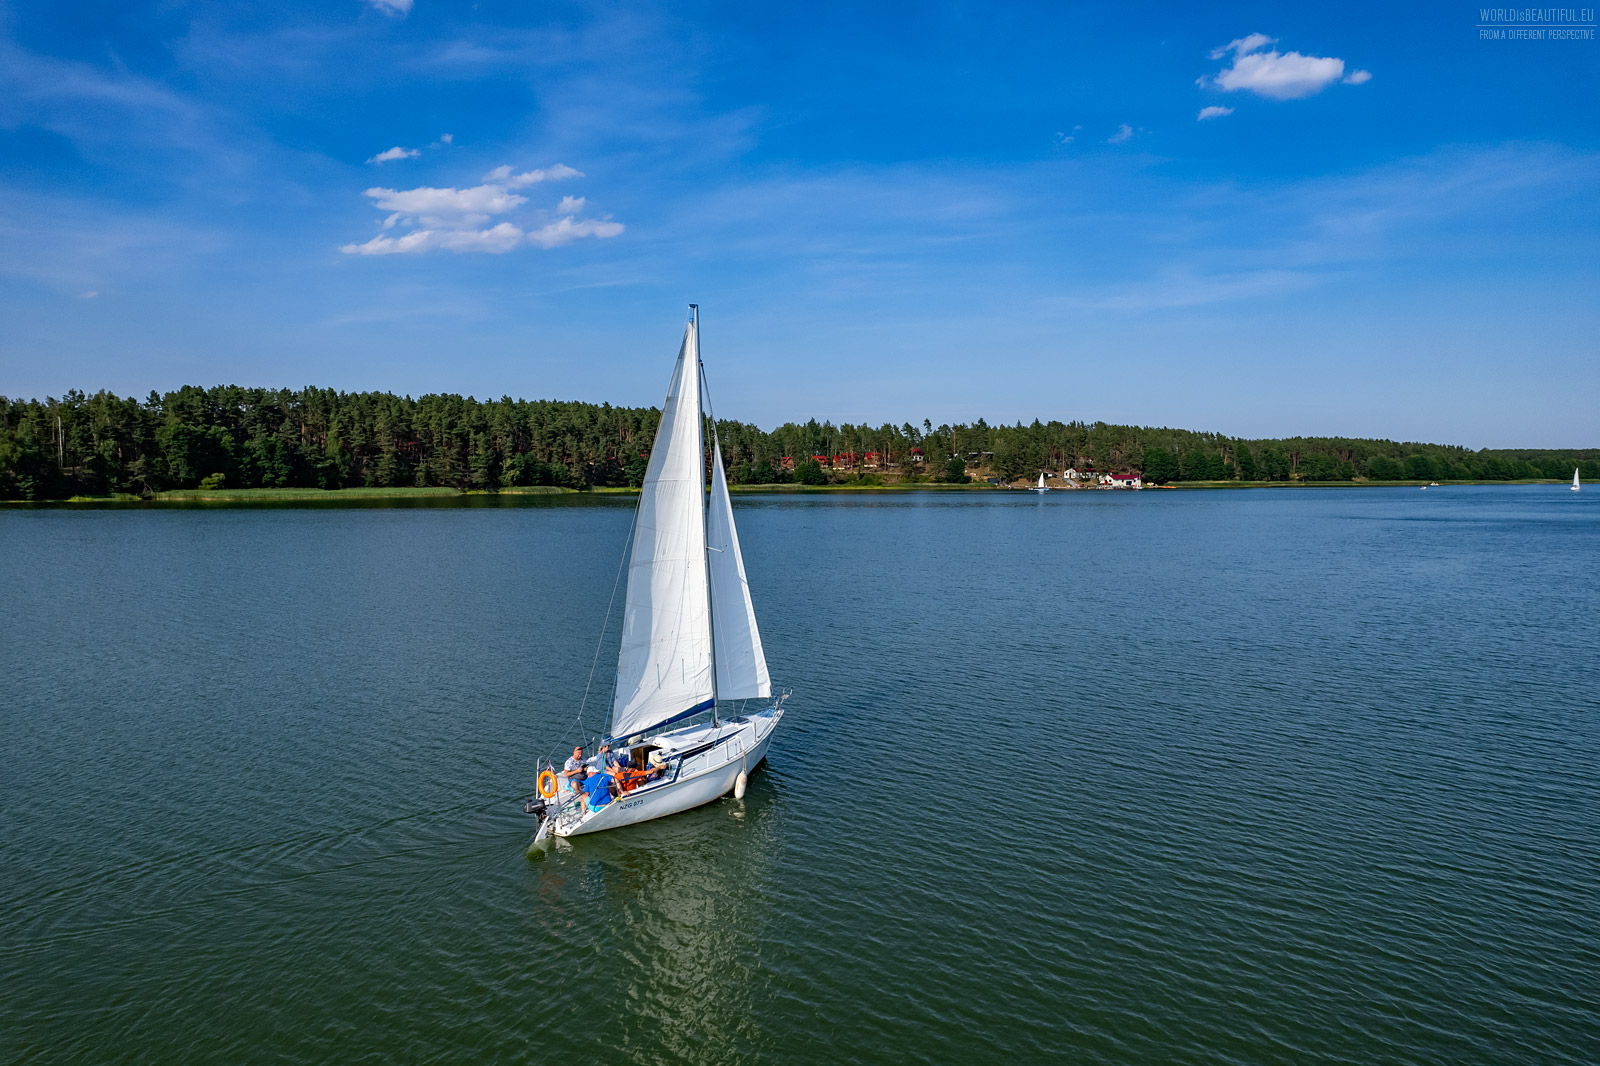 Discovering the beauty of Wdzydze Lake